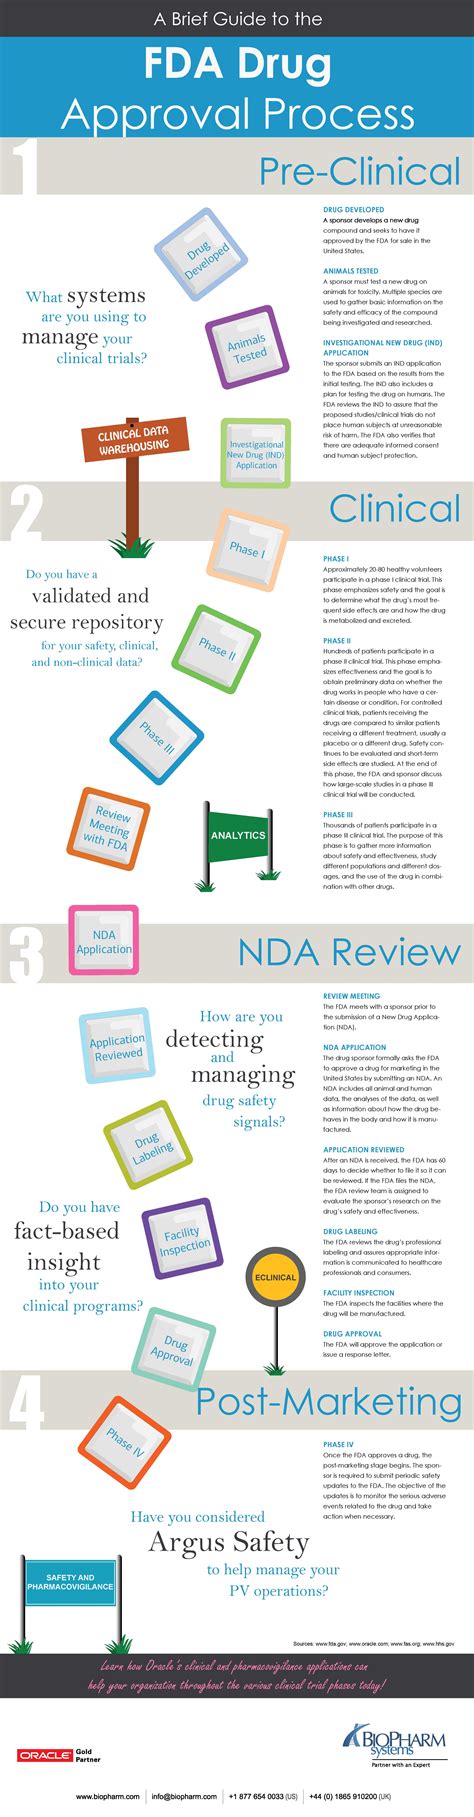 A Brief Guide To The Fda Drug Approval Process Visually